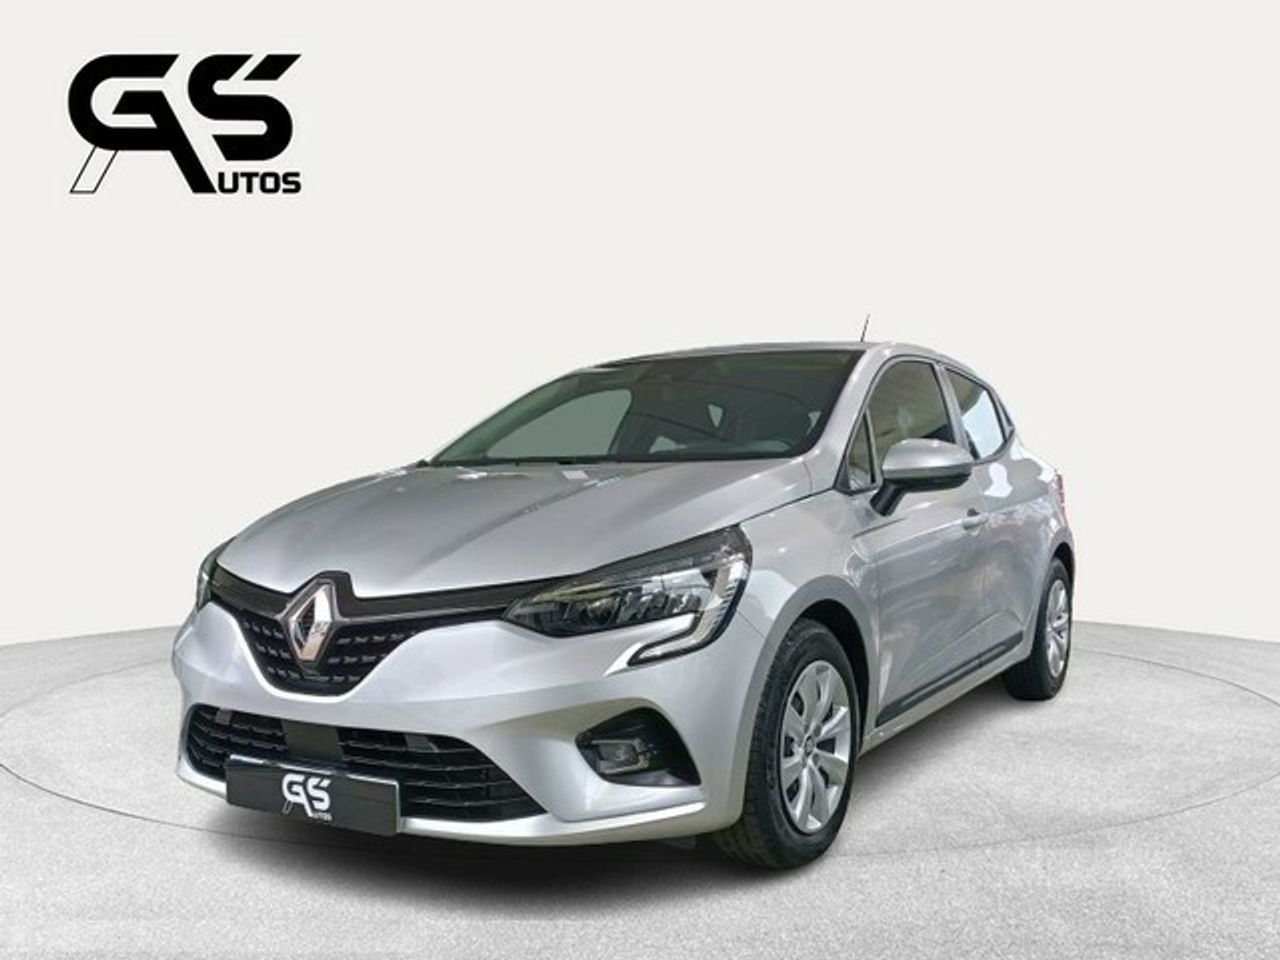 Renault clio business tce 66 kw (90 cv)